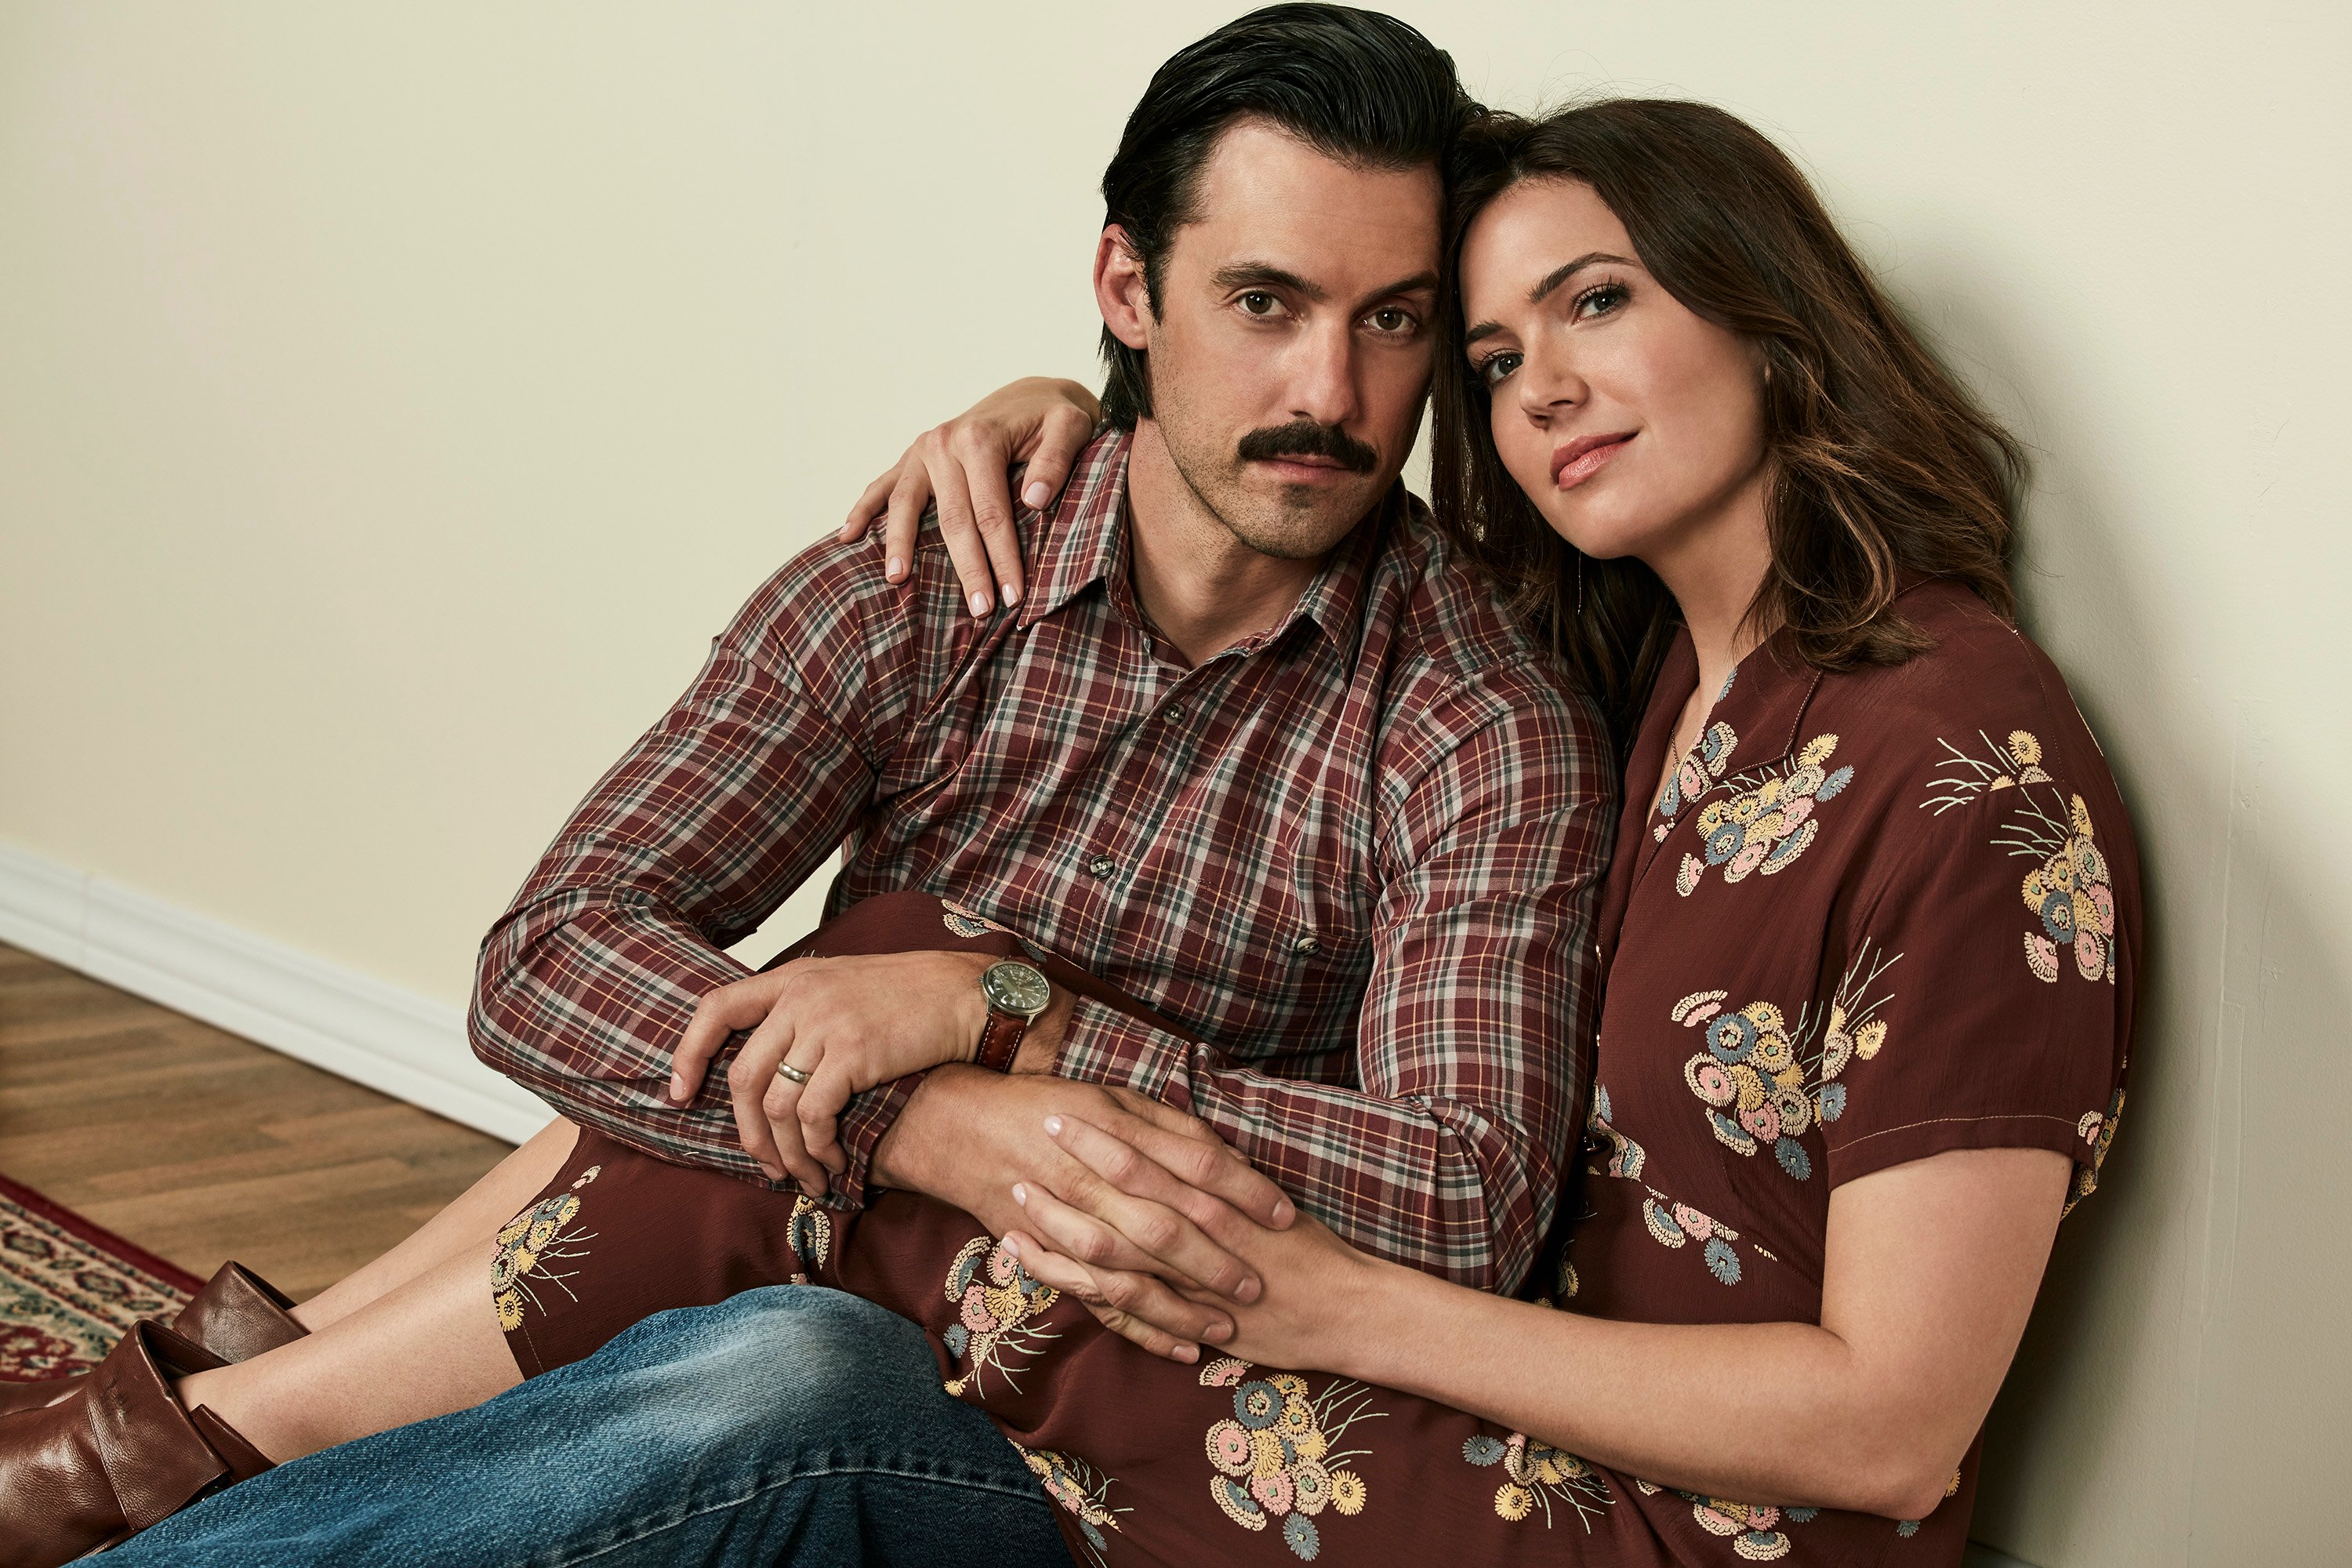 Could ‘This Is Us’ Become a Movie After the Finale? Dan Fogelman Explains the Show’s Original Concept